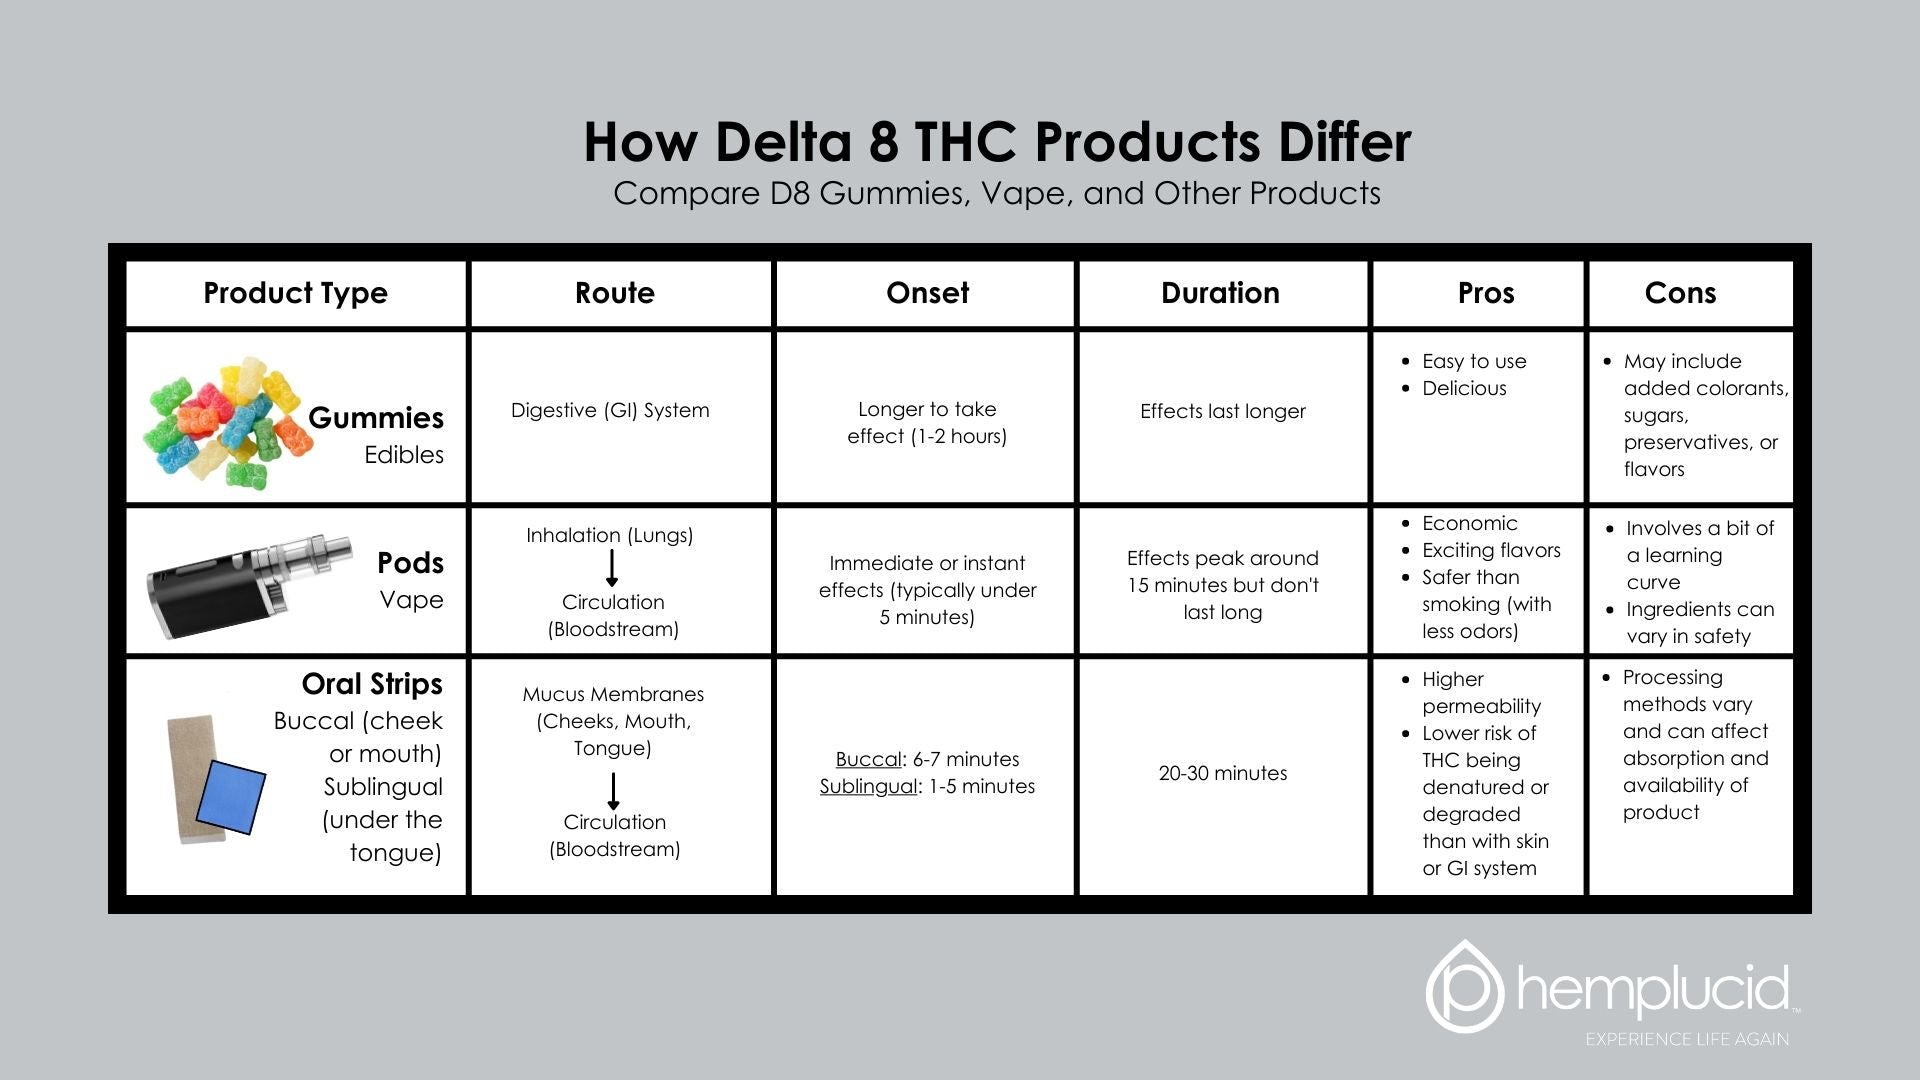 How Delta-8 THC products differ